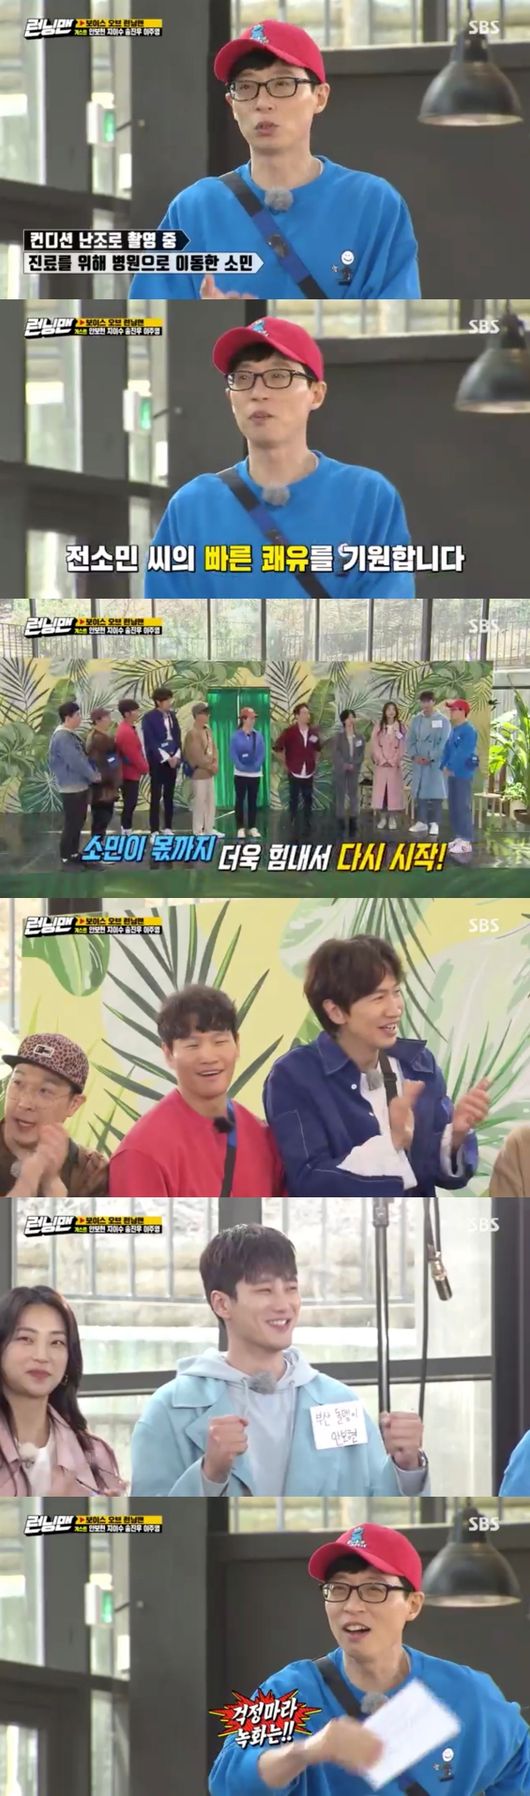 Jeon So-min was away due to poor Condition during filming of Running Man.The new stars An Bo-hyeon, Lee Ju-young, Ji-soo and Song Jin-woo appeared as guests on the SBS entertainment program Running Man broadcast on the 12th.On this day, Jeon So-min left his seat during filming. Yoo Jae-Suk said, So-min was not feeling well from now on.I went to the Hospital immediately, he said. We will work hard with the hope that the people will be okay soon. The members applauded and applauded, and Lee Kwang-soo shouted, Somin, come on. Yoo Jae-Suk also said, Go well. Dont worry, Im recording.Jeon So-min said on February 2 that he will stop his activities to restore his health.At the time, Jeon So-mins agency Entertainment IM said, Jeon So-min will stop working for about a month to recover his health. He will take a rest and concentrate on recovery.Capture the broadcast screen of Running Man